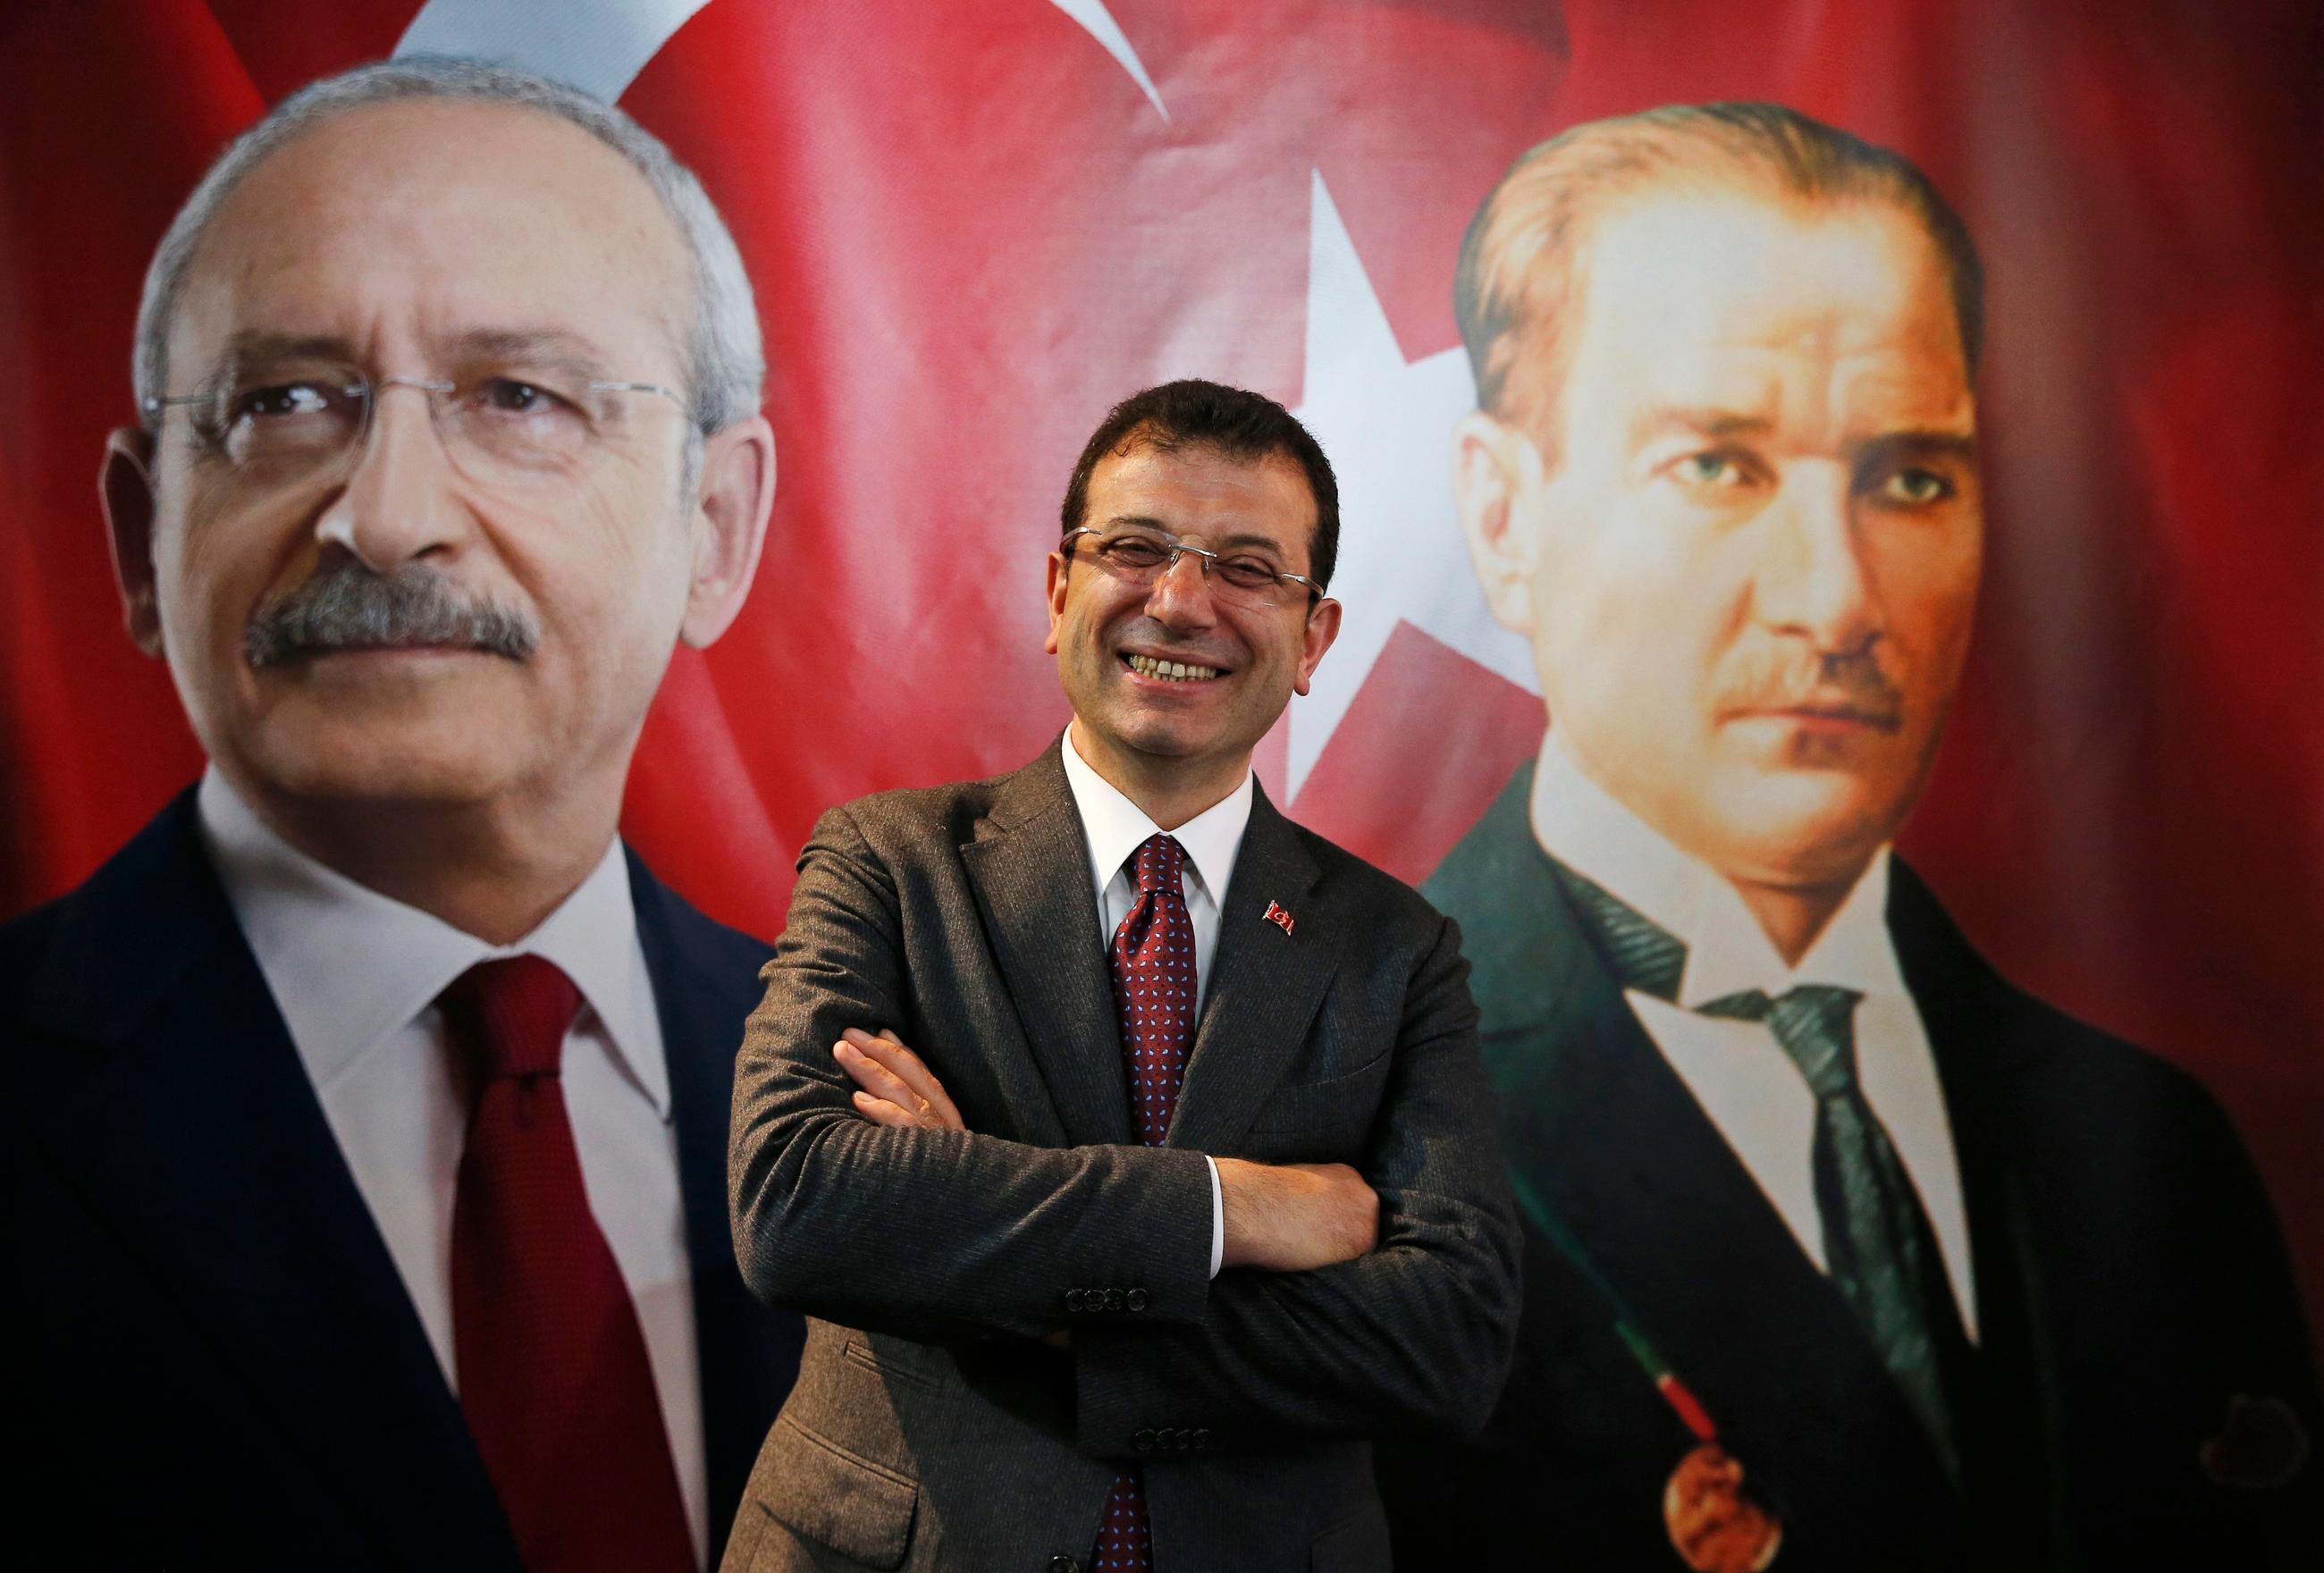 Backdropped by a poster of Kemal Kilicdaroglu, left, and Mustafa Kemal Ataturk, right, Ekrem Imamoglu poses for a photo in 2019 (AP)